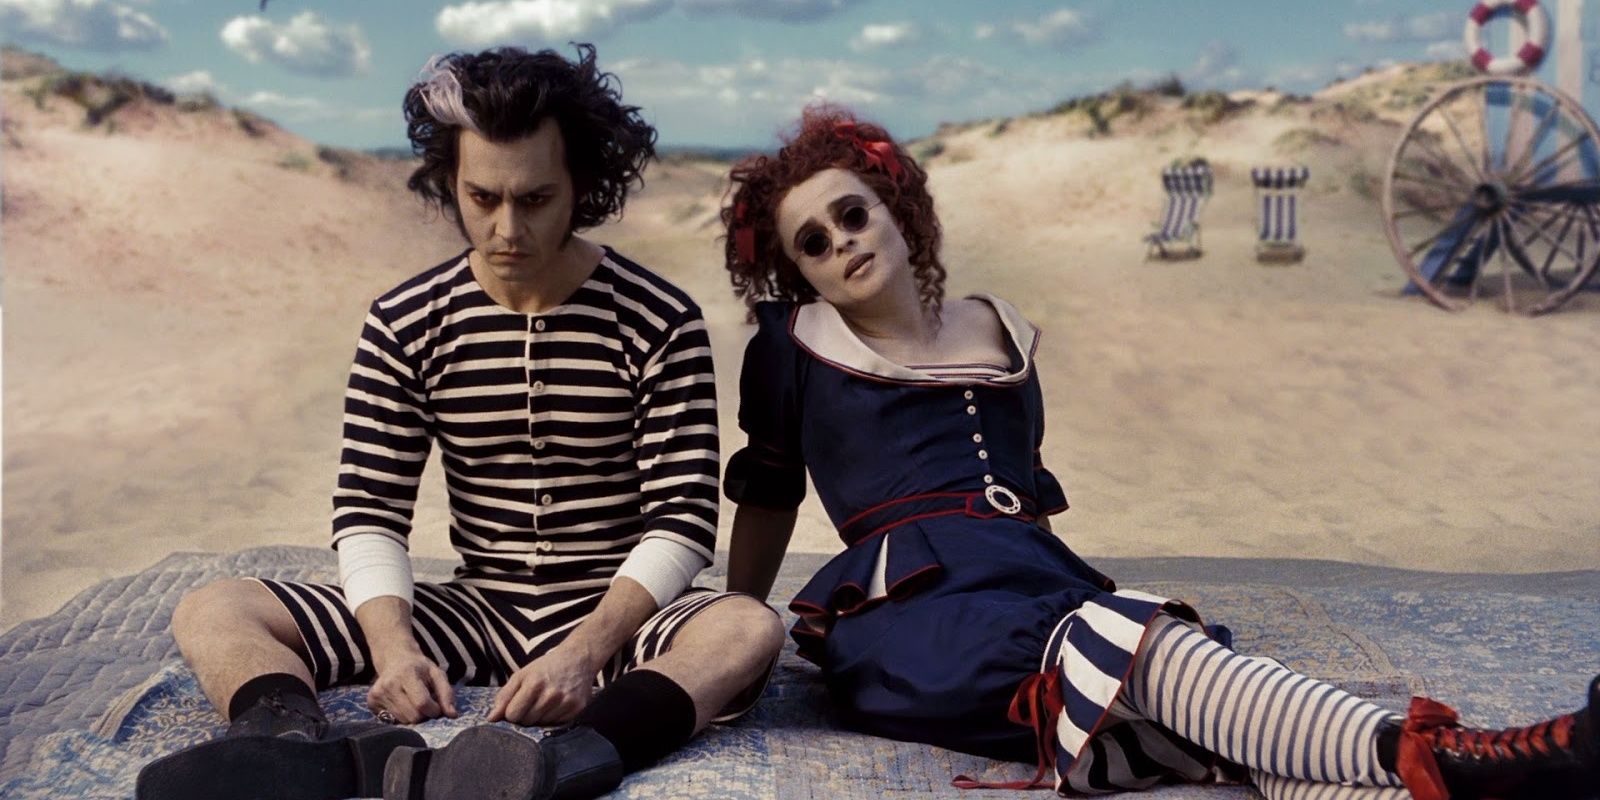 Sweeney Todd and Miss Lovett at the beach in Sweeney Todd